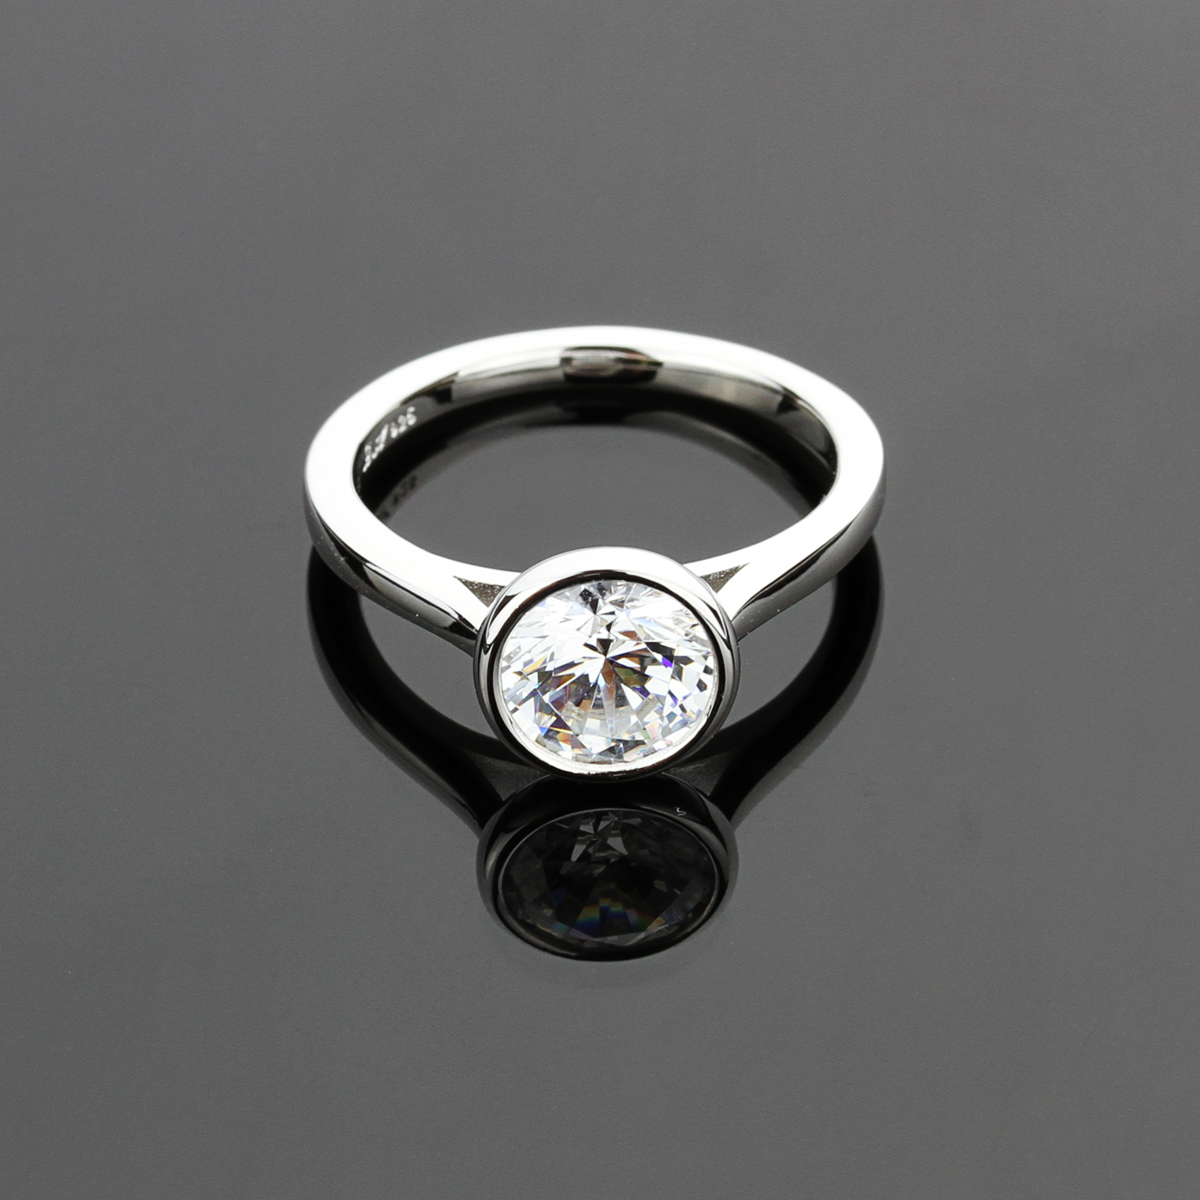 8mm Platinum Plated Silver 2ct CZ Bezel Solitaire Wedding Engagement Ring